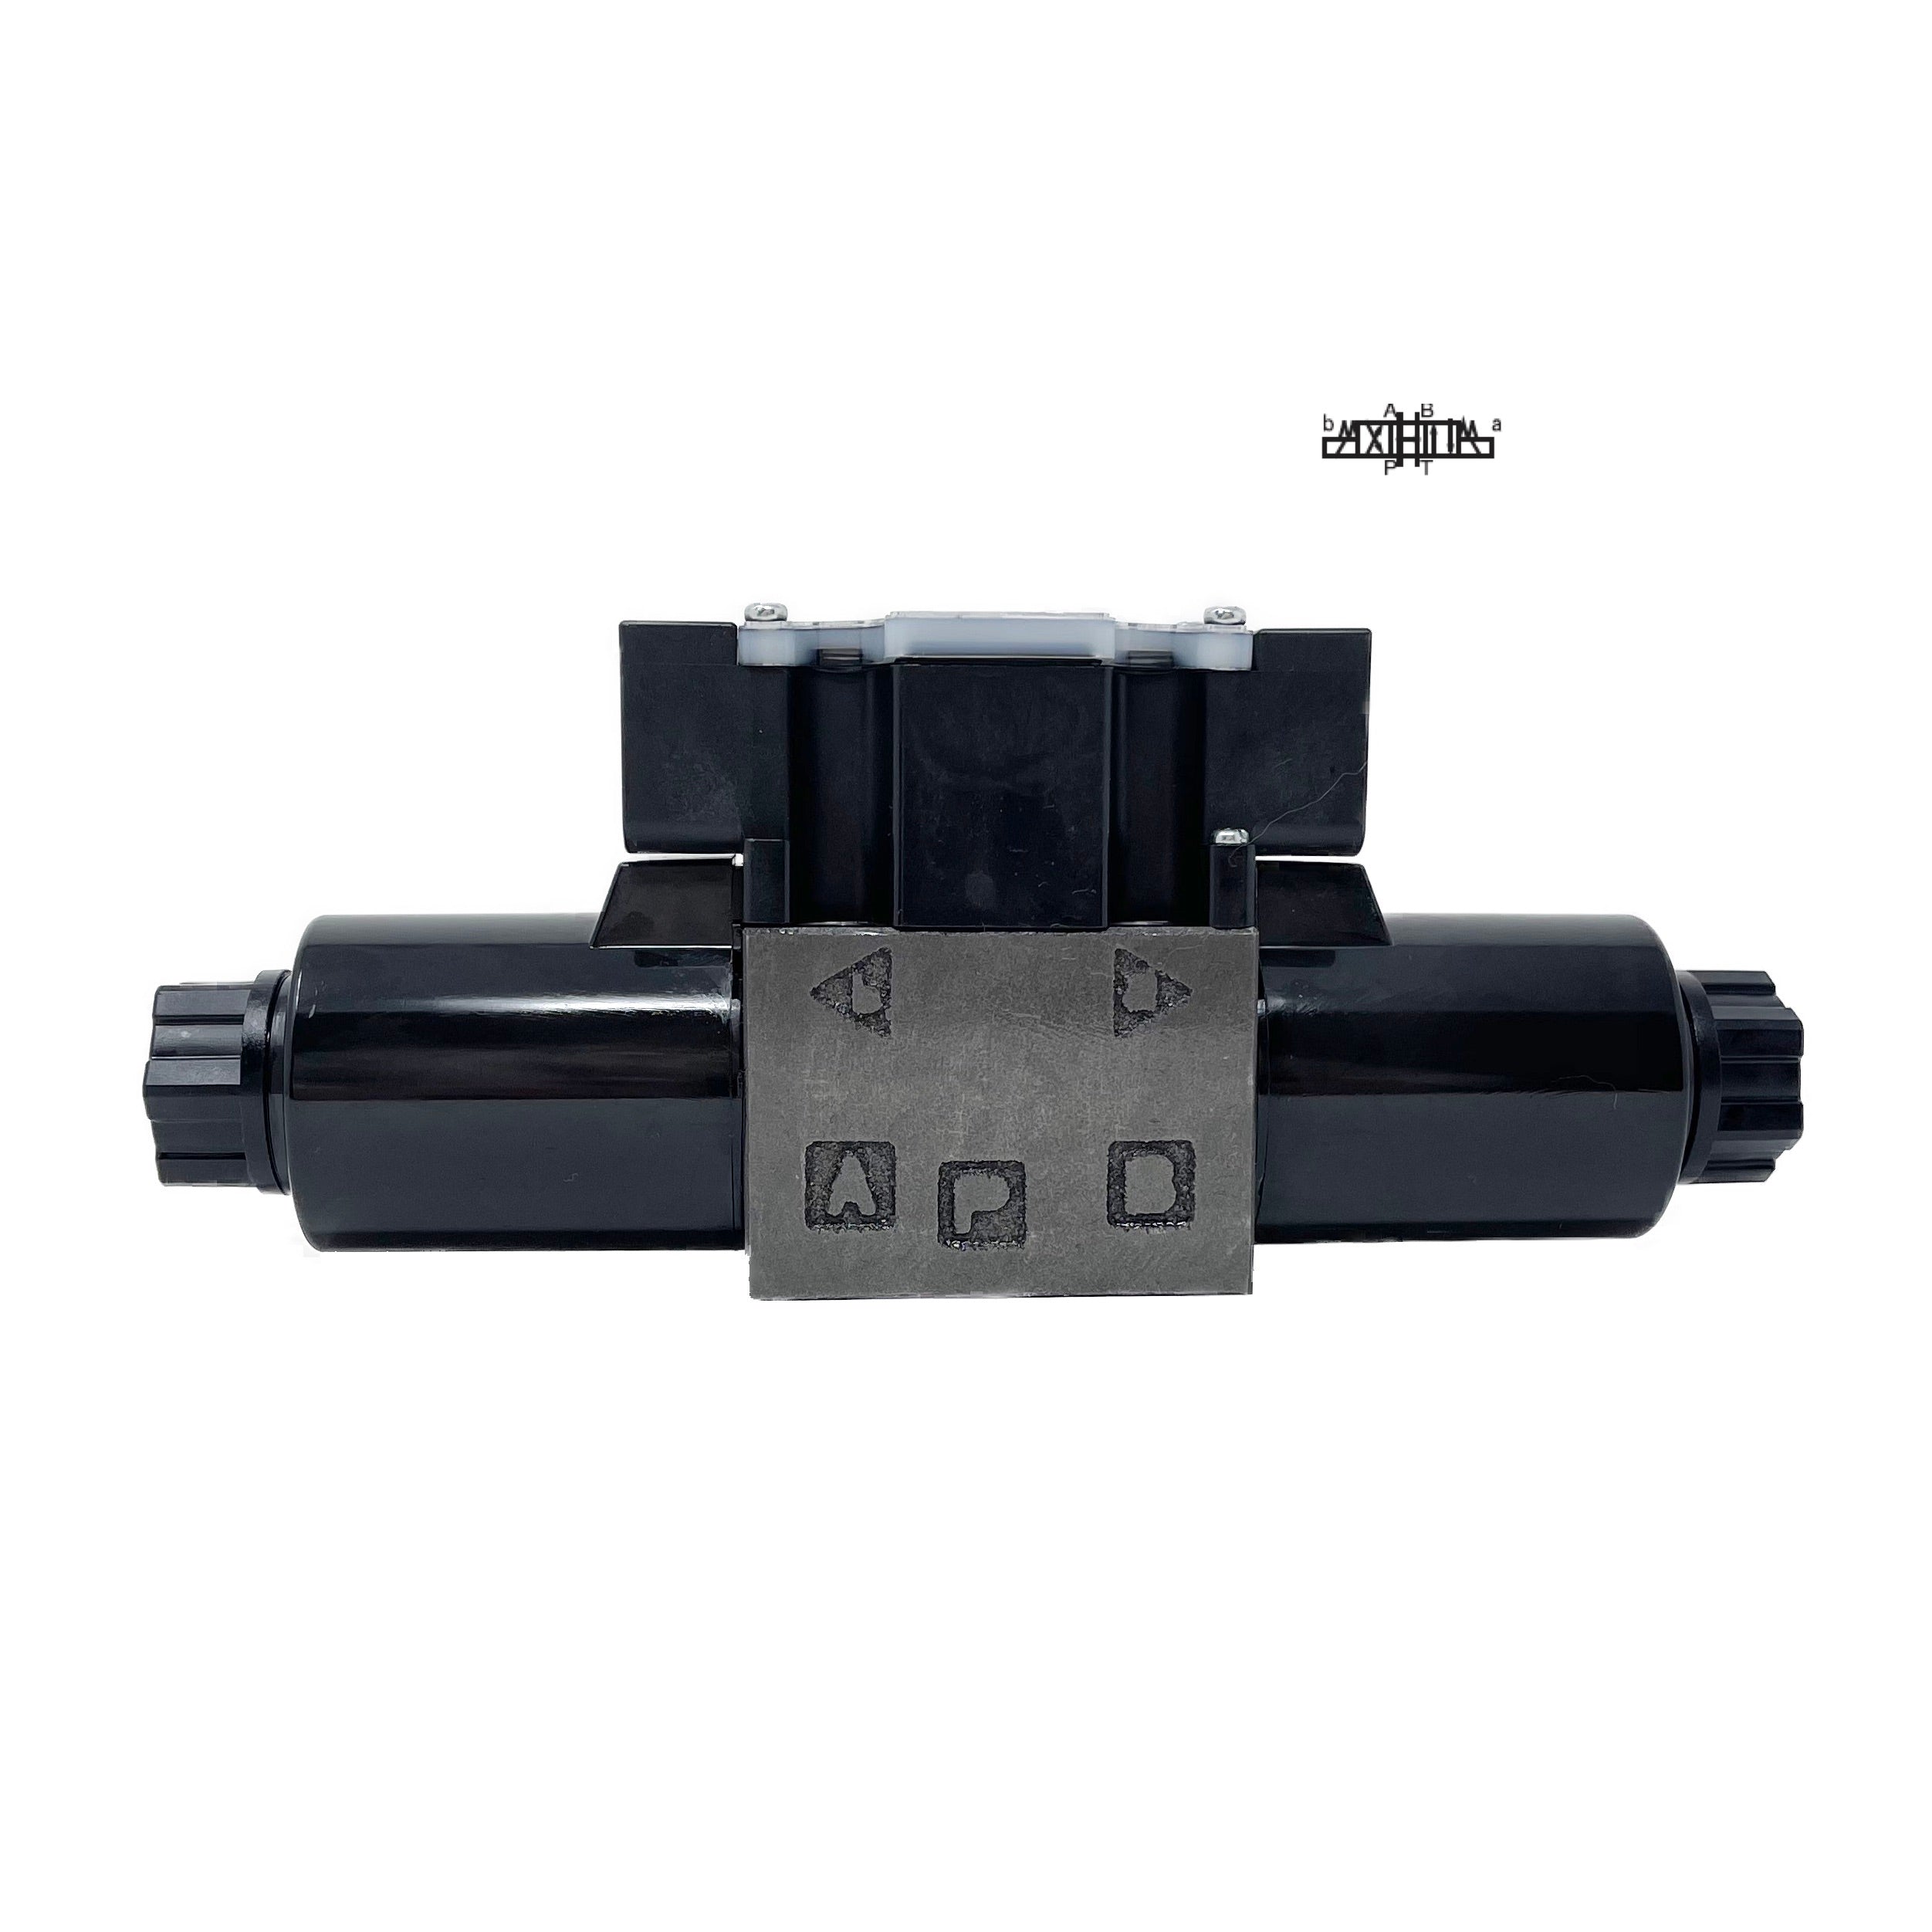 SS-G01-C4-R-D2-E31 : Nachi Solenoid Valve, 3P4W, D03 (NG6), 13.2GPM, 5075psi, All Ports Open Neutral, 24 VDC, Wiring Box with Lights